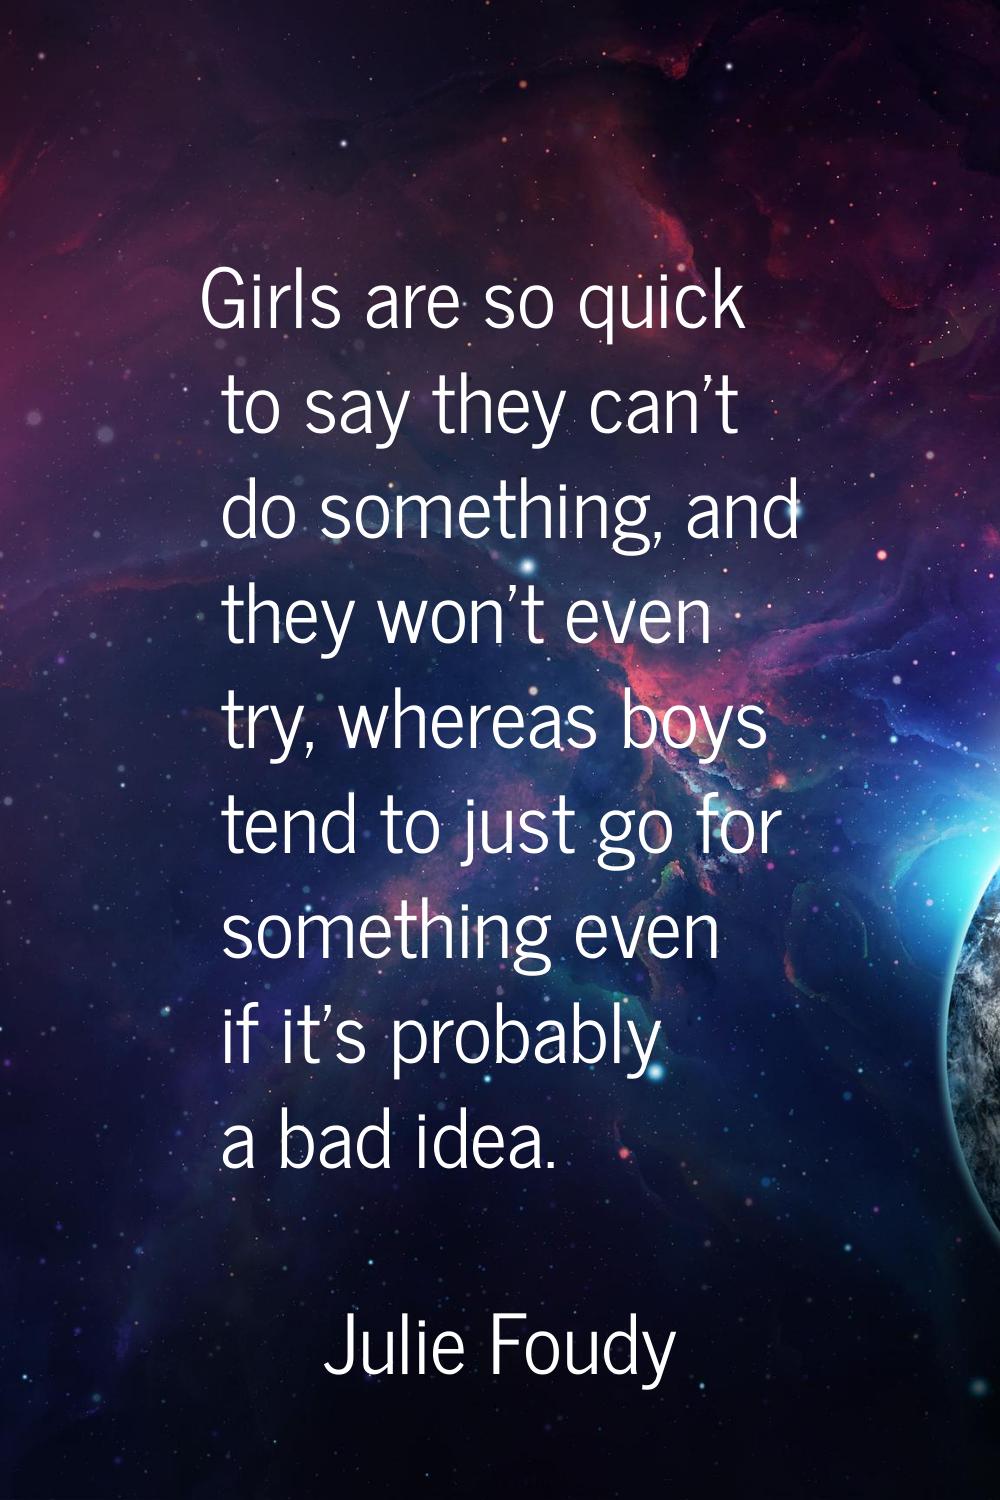 Girls are so quick to say they can't do something, and they won't even try, whereas boys tend to ju